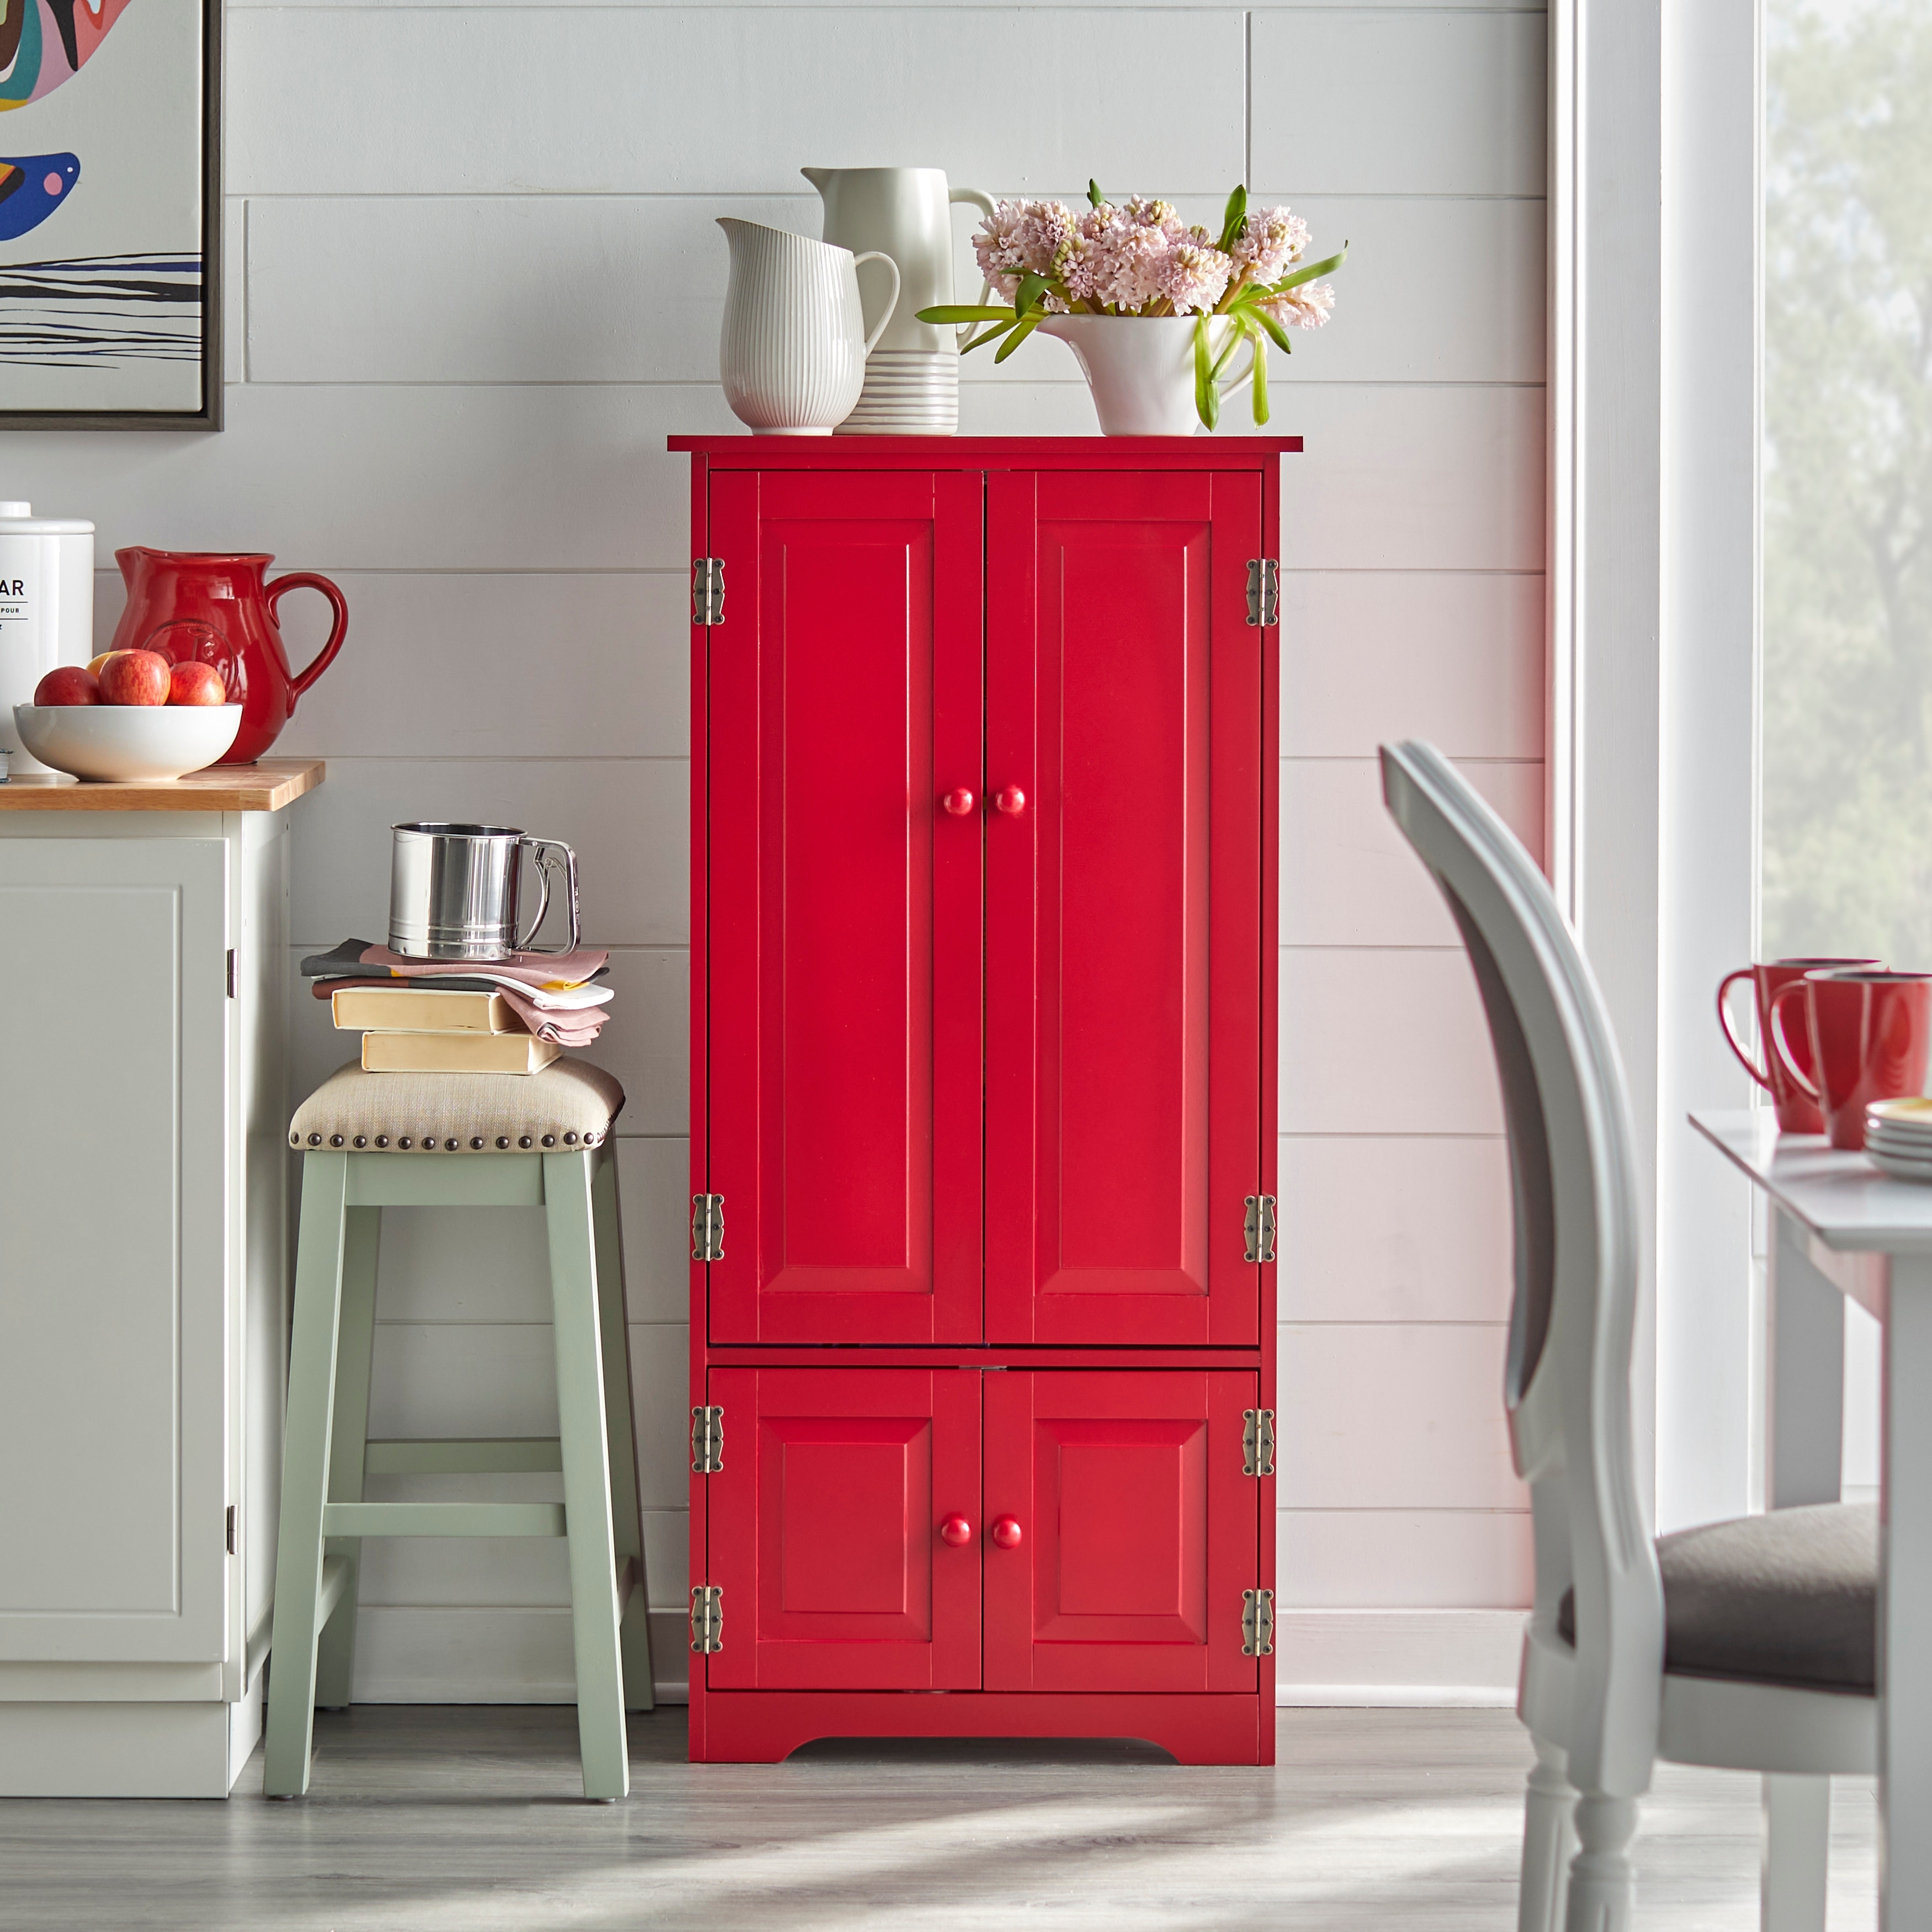 https://ak1.ostkcdn.com/images/products/is/images/direct/9f3f523d641bf12a7279053bbf6fdabc401f5f5e/Simple-Living-Tall-Cabinet.jpg